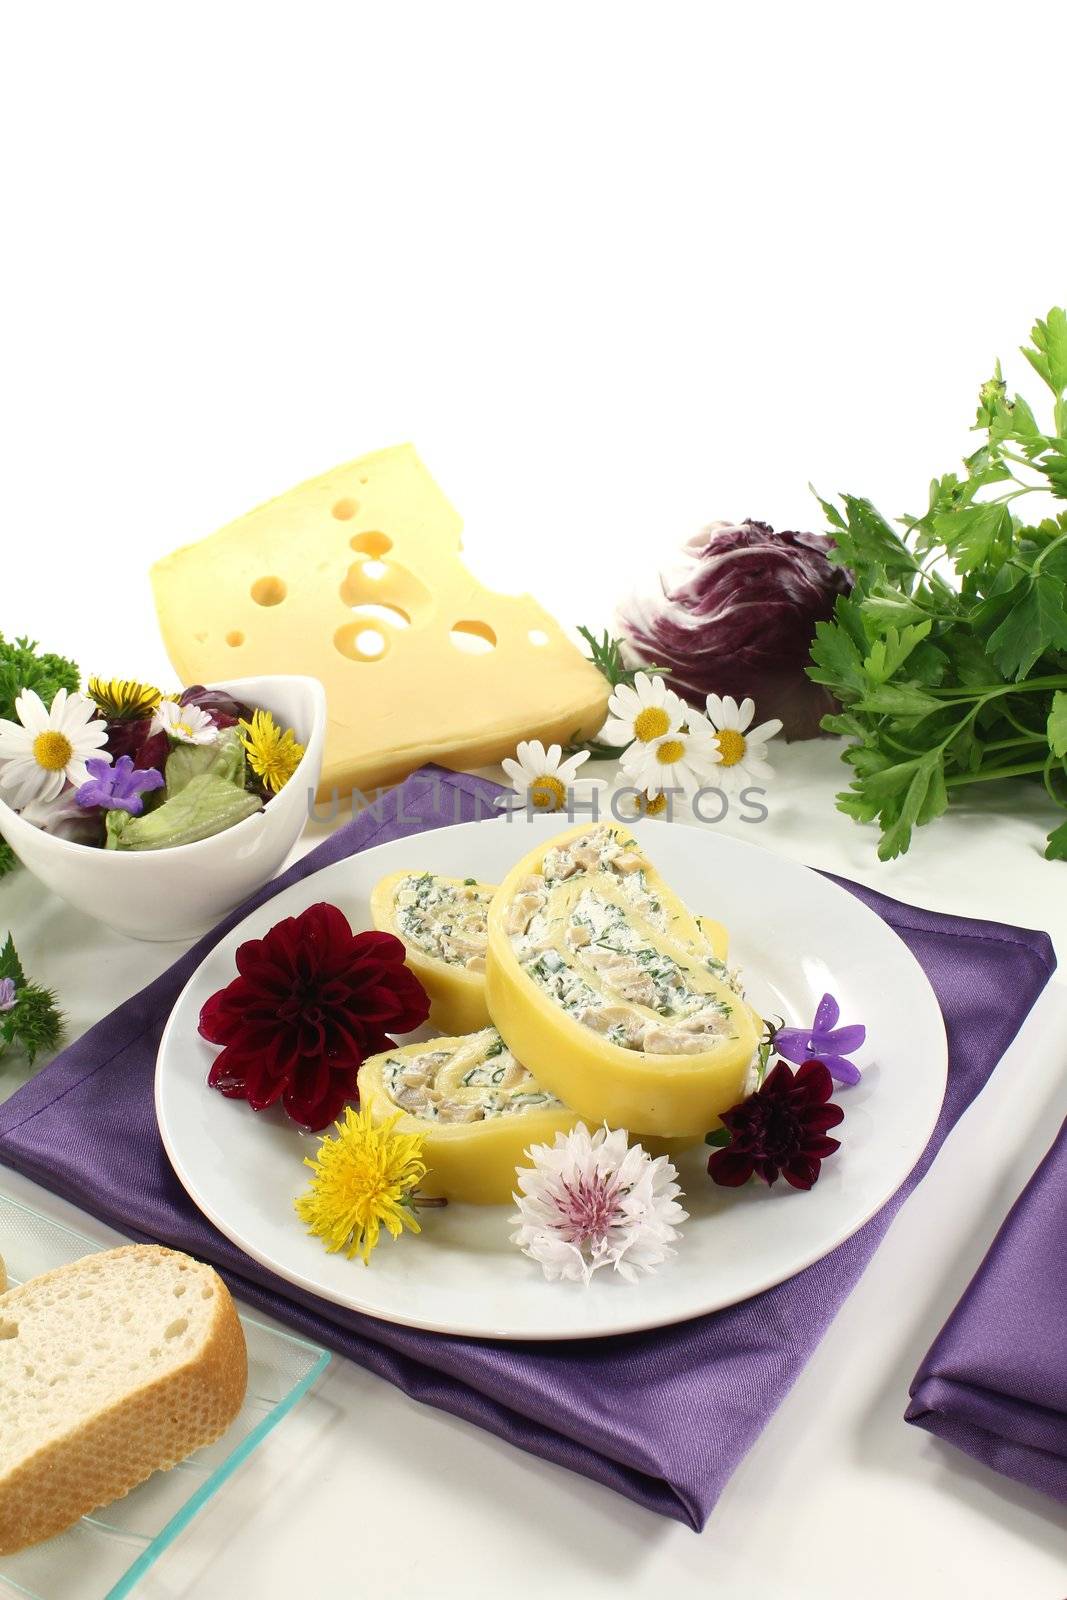 Cheese rolls with edible flowers by discovery